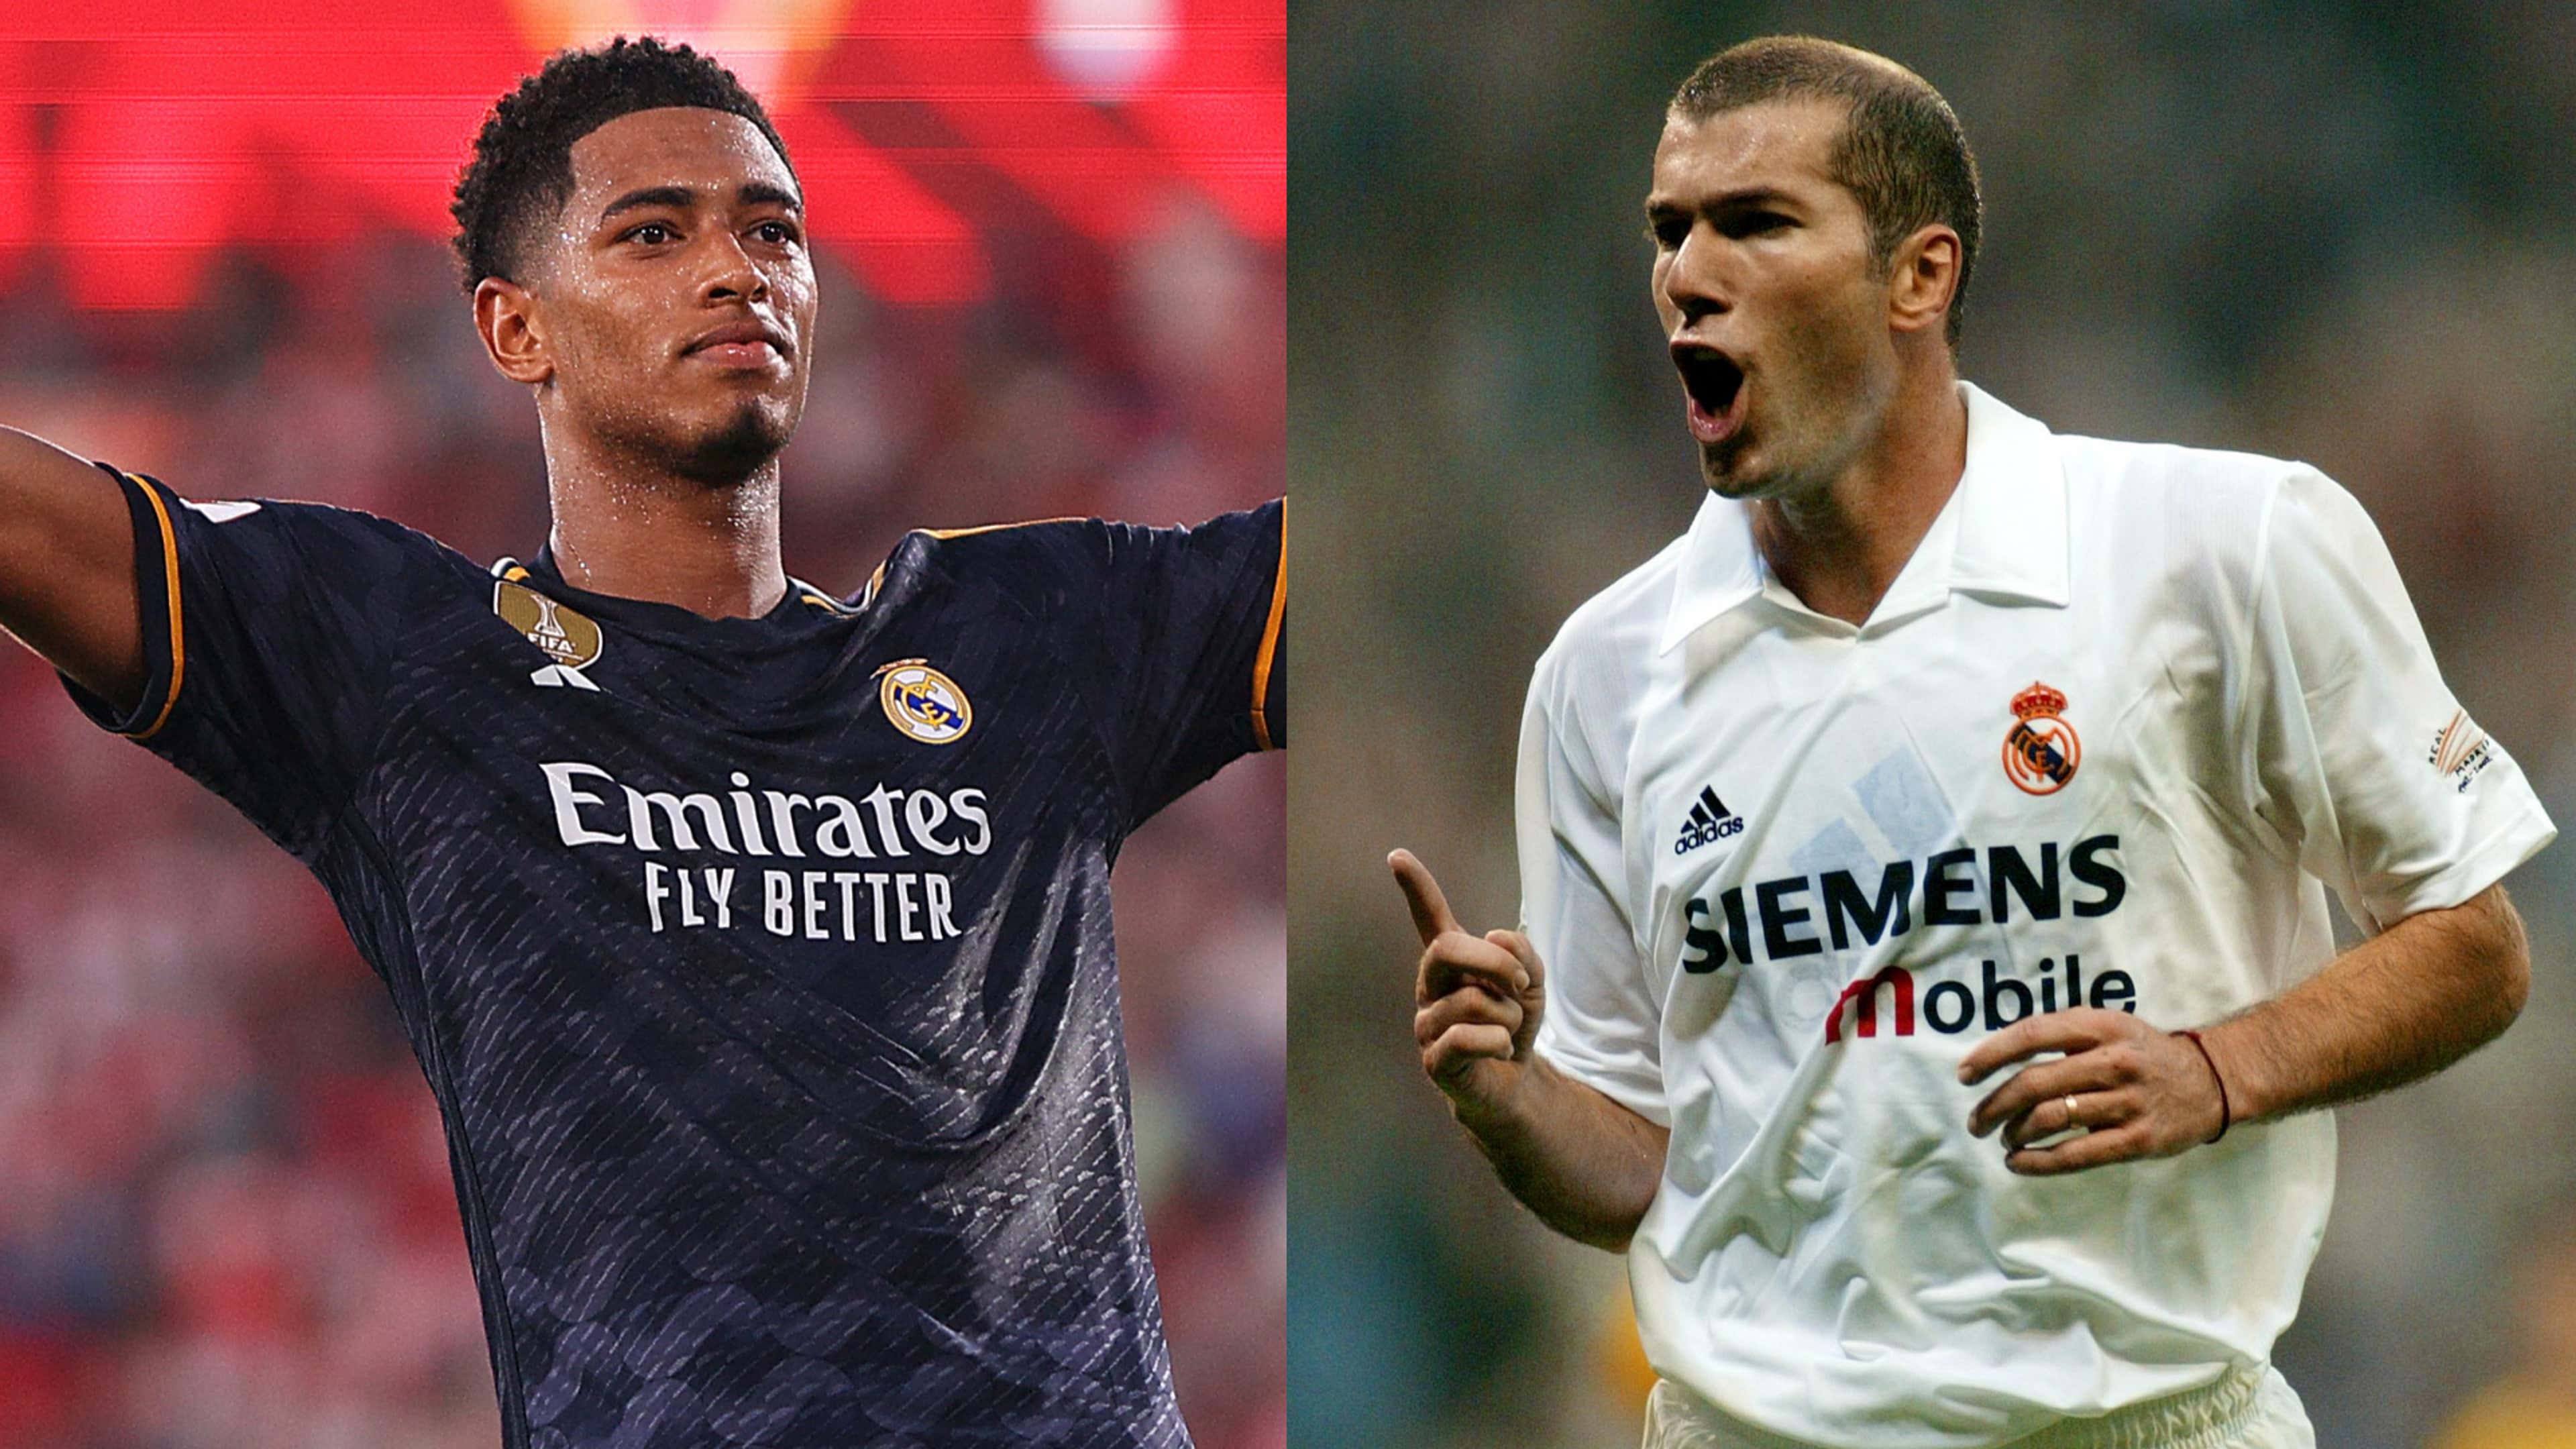 Five players who have worn both Real Madrid and Sevilla jerseys